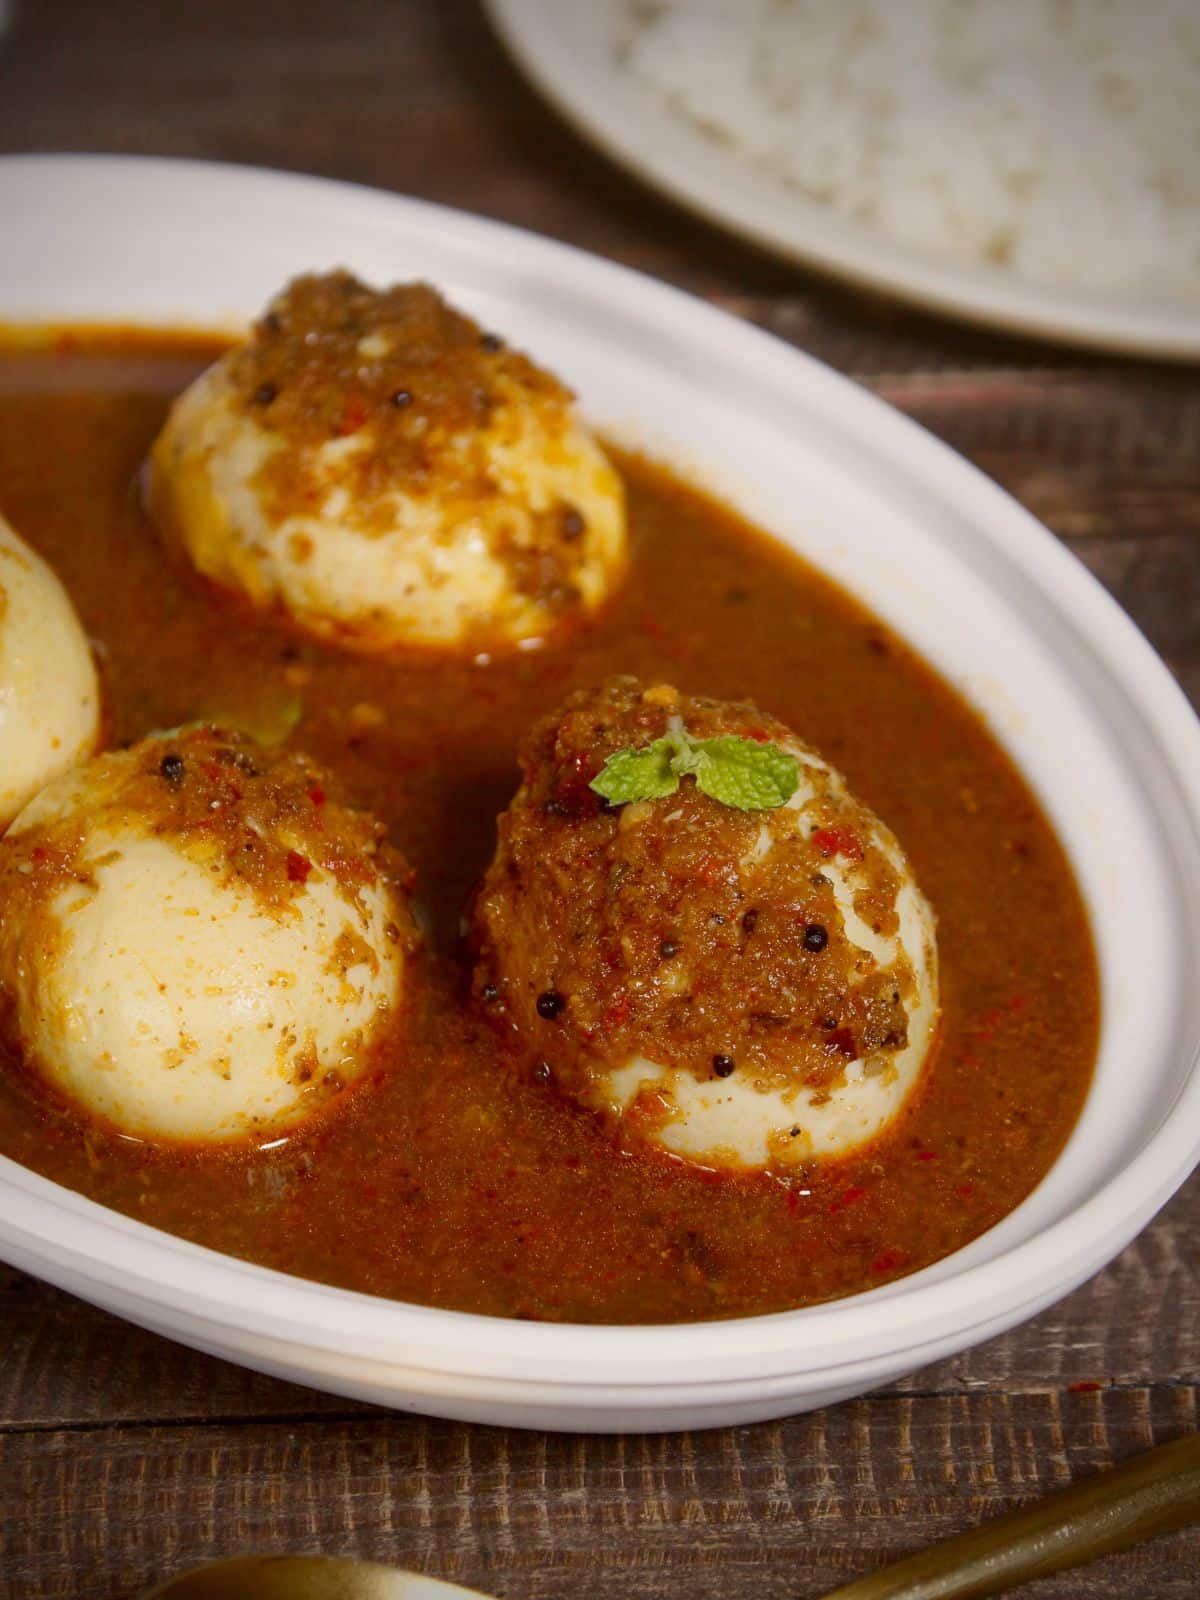 Spicy Chettinad style egg curry